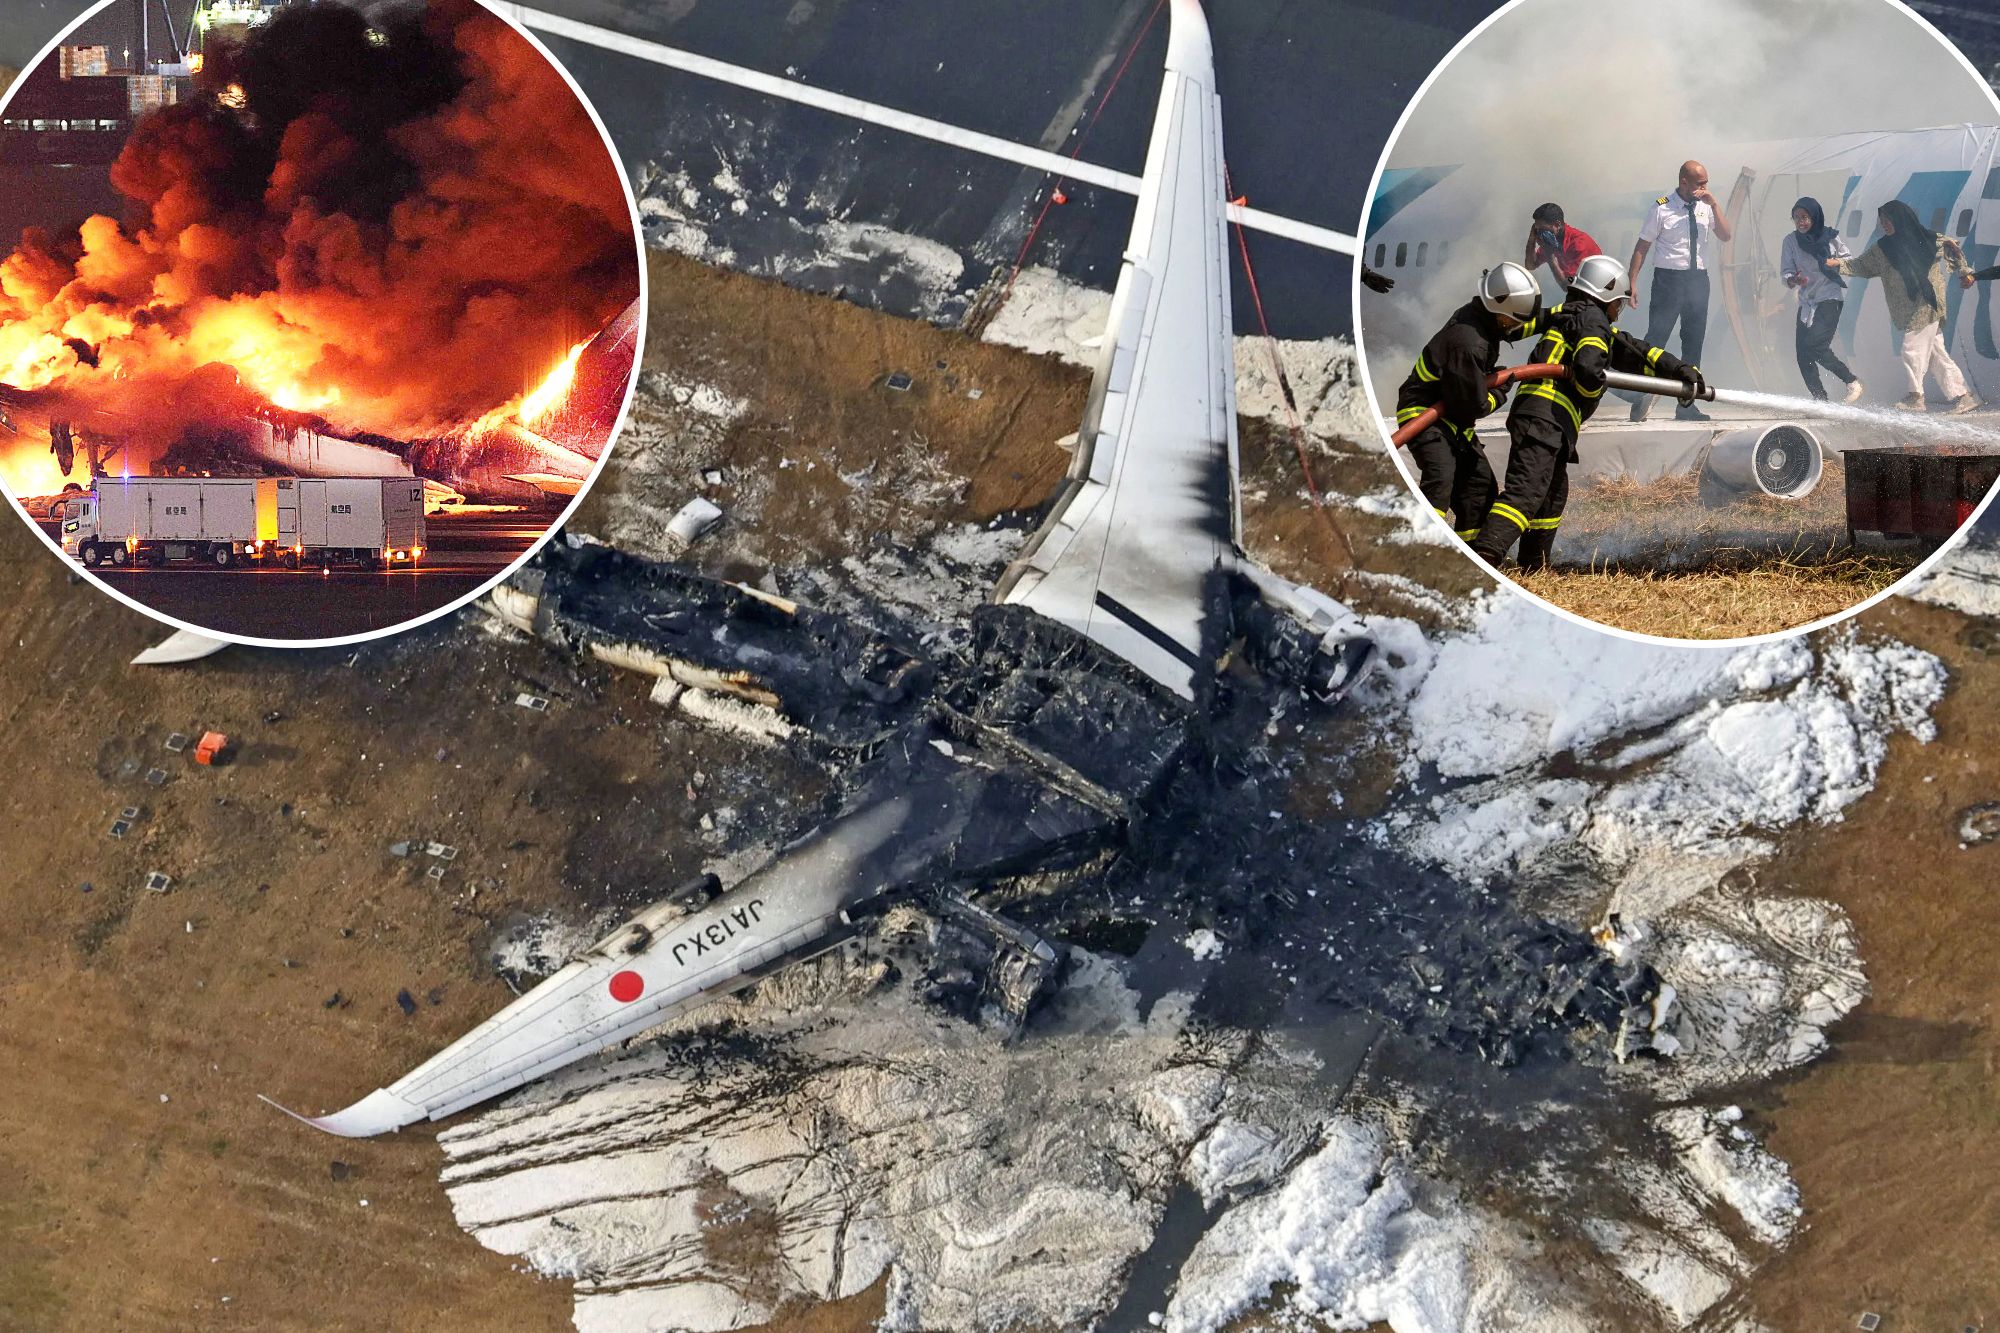 list of aircraft accidents and incidents resulting in at least 50 fatalities